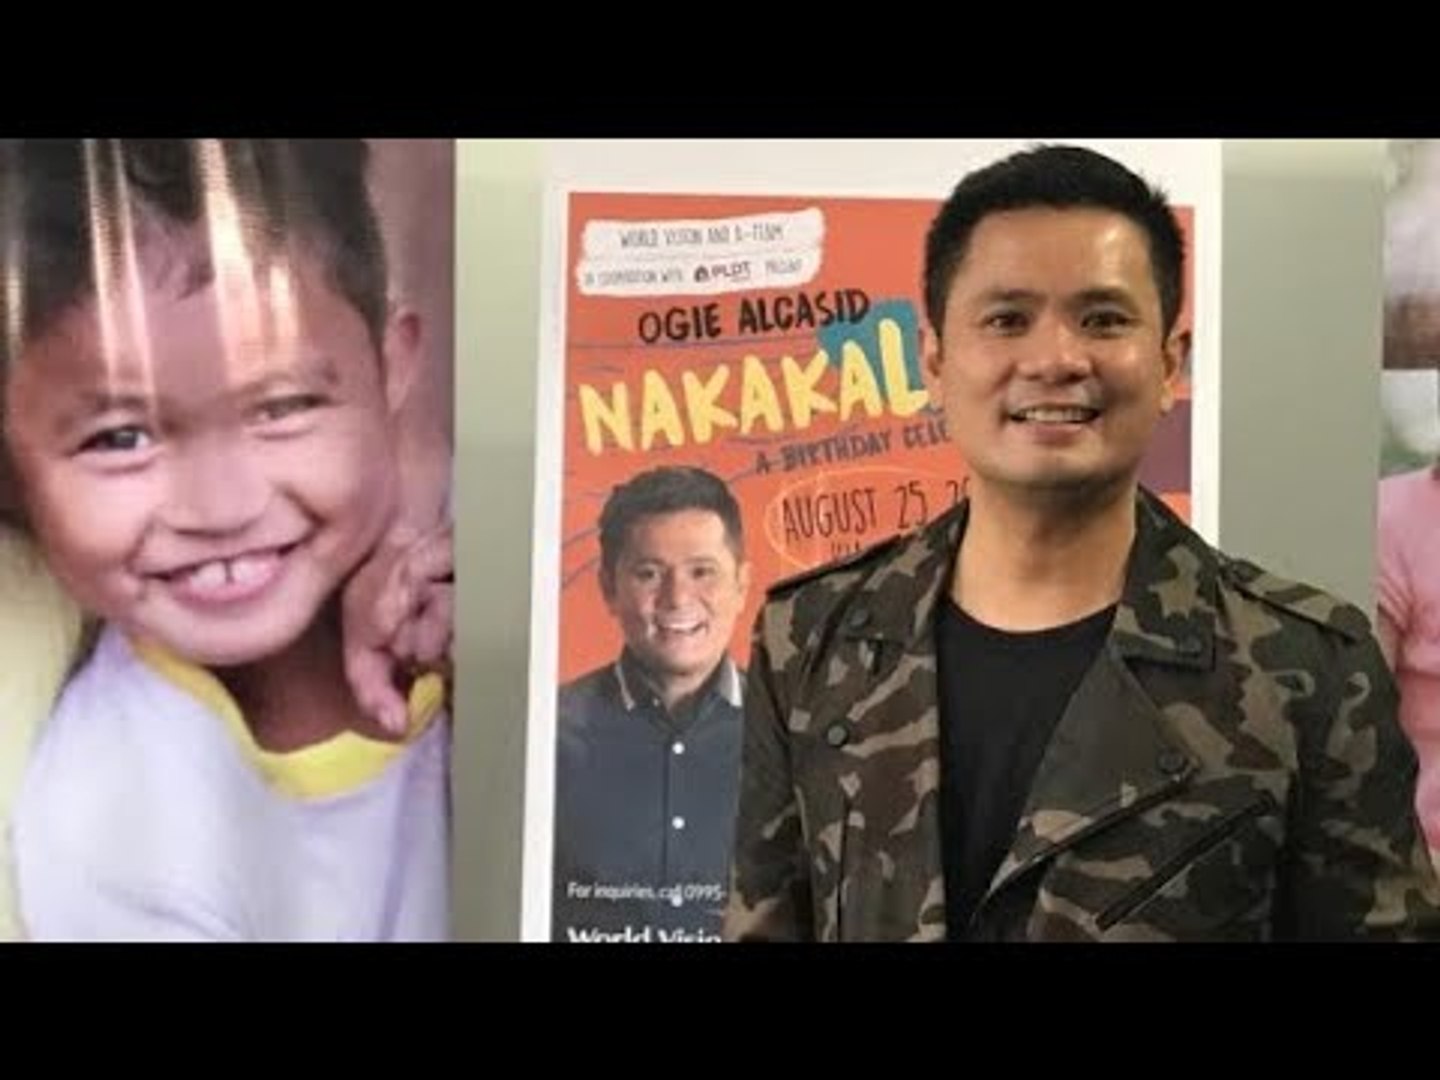 Ogie Alcasid dedicates upcoming concert to OPM, advocacy for children